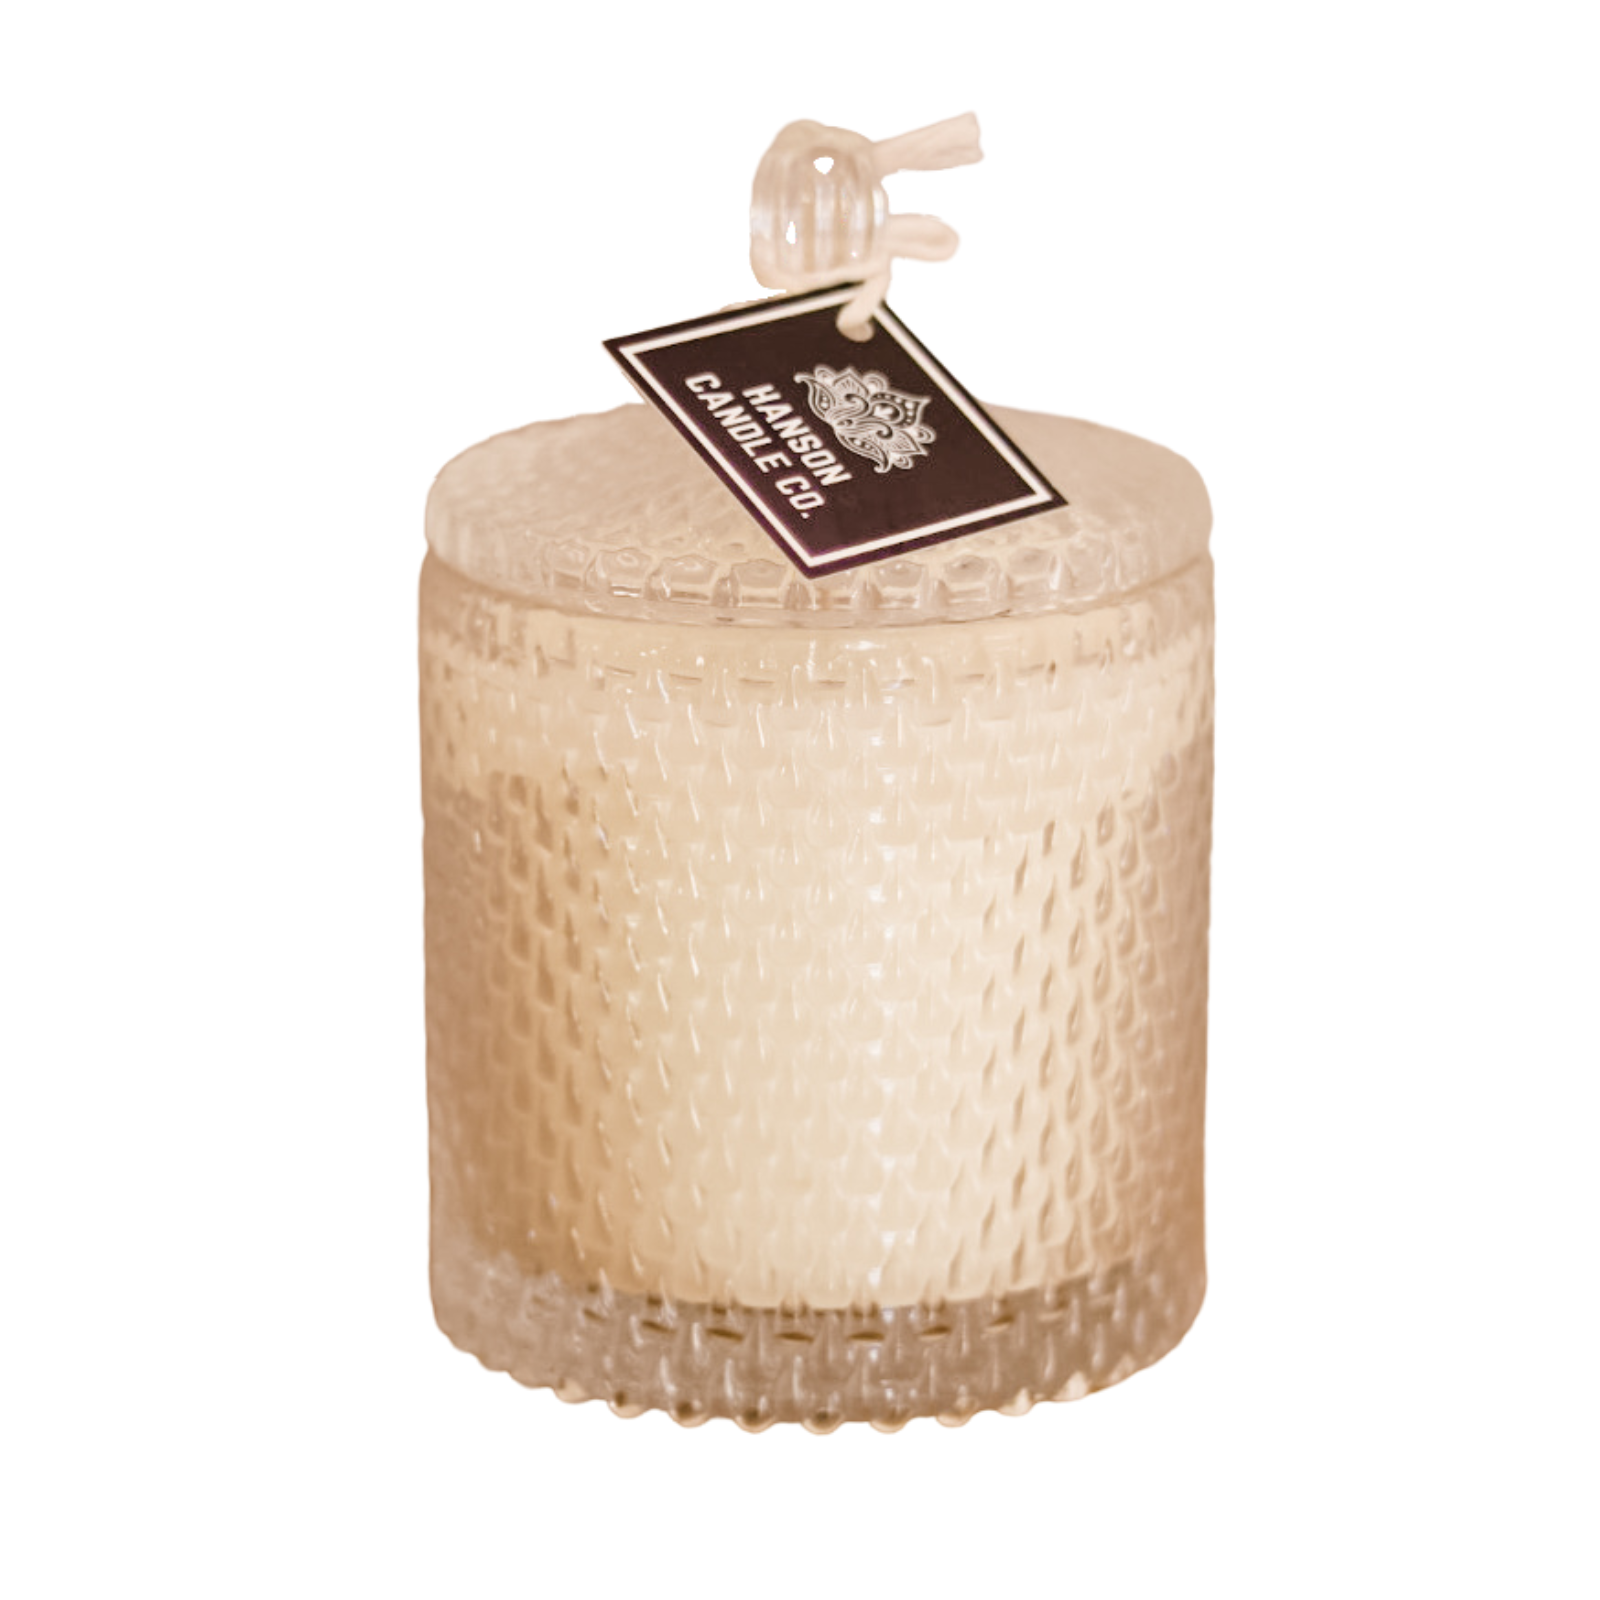 Statement Jar Candle | CLEAR